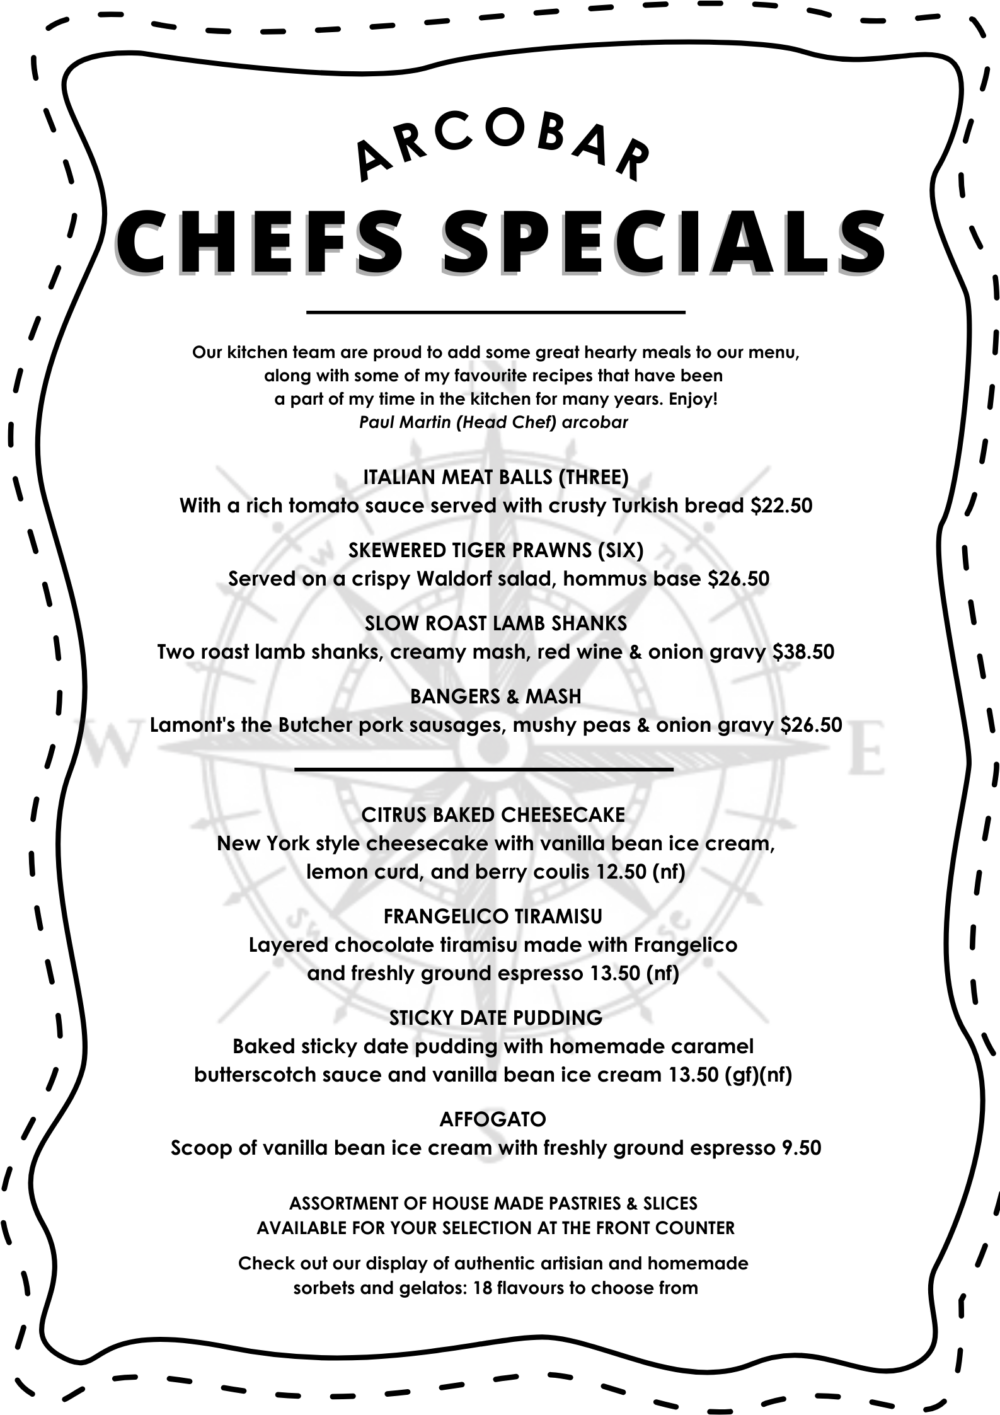 Chefs Specials NOW AVAILABLE